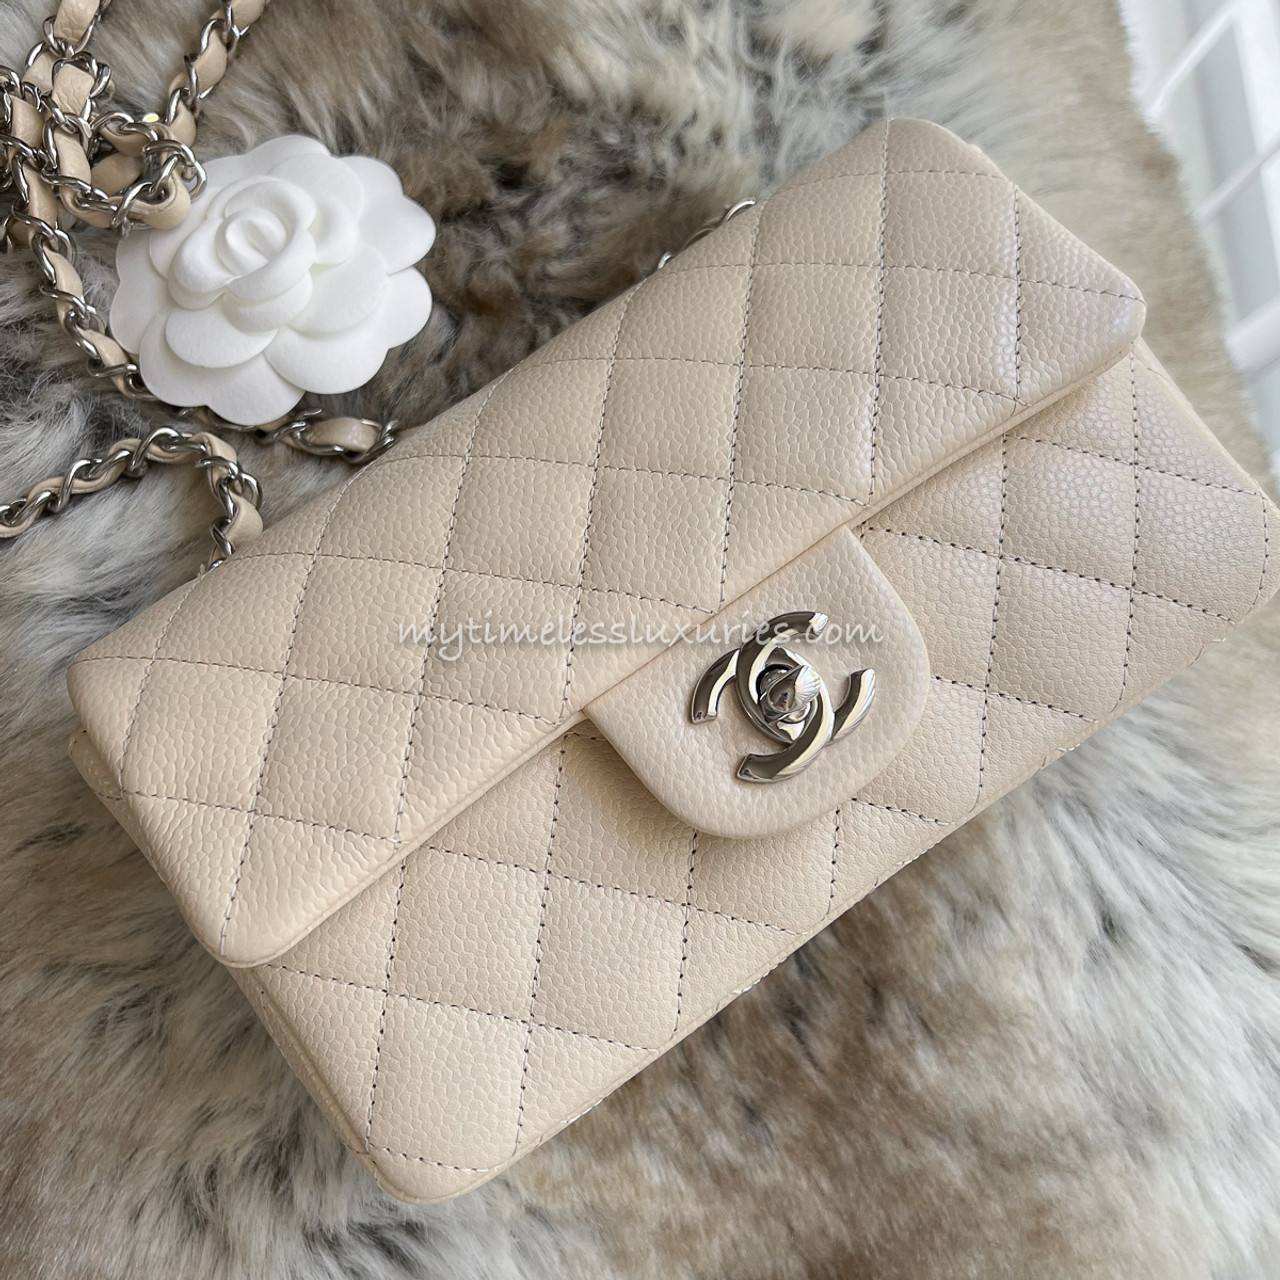 Chanel Increases Prices for 2023 Heres What You Need to Know  PurseBlog